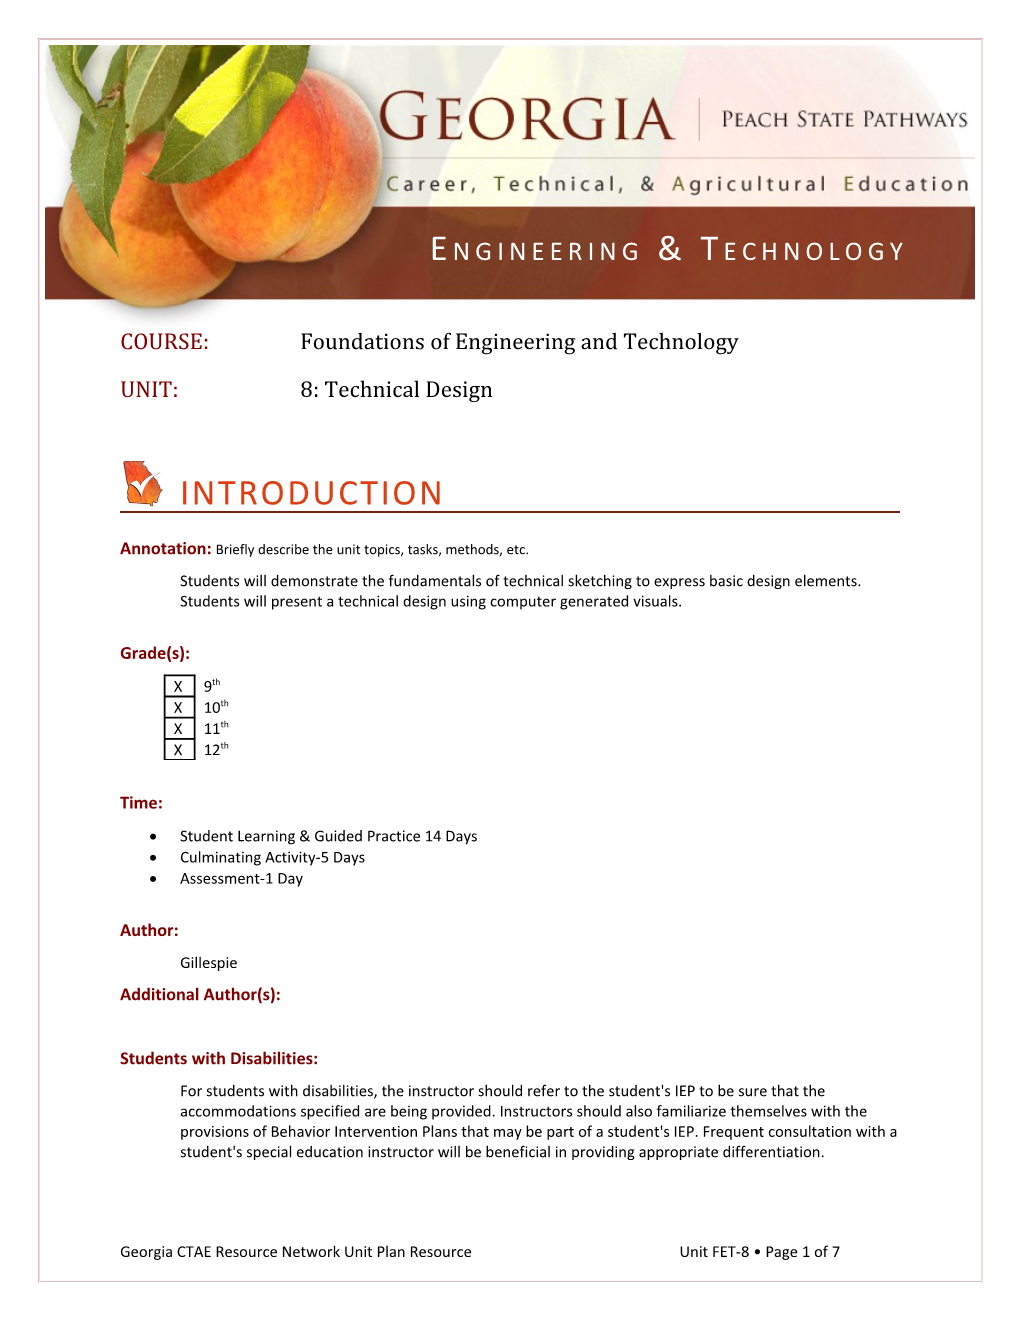 COURSE: Foundations of Engineering and Technology